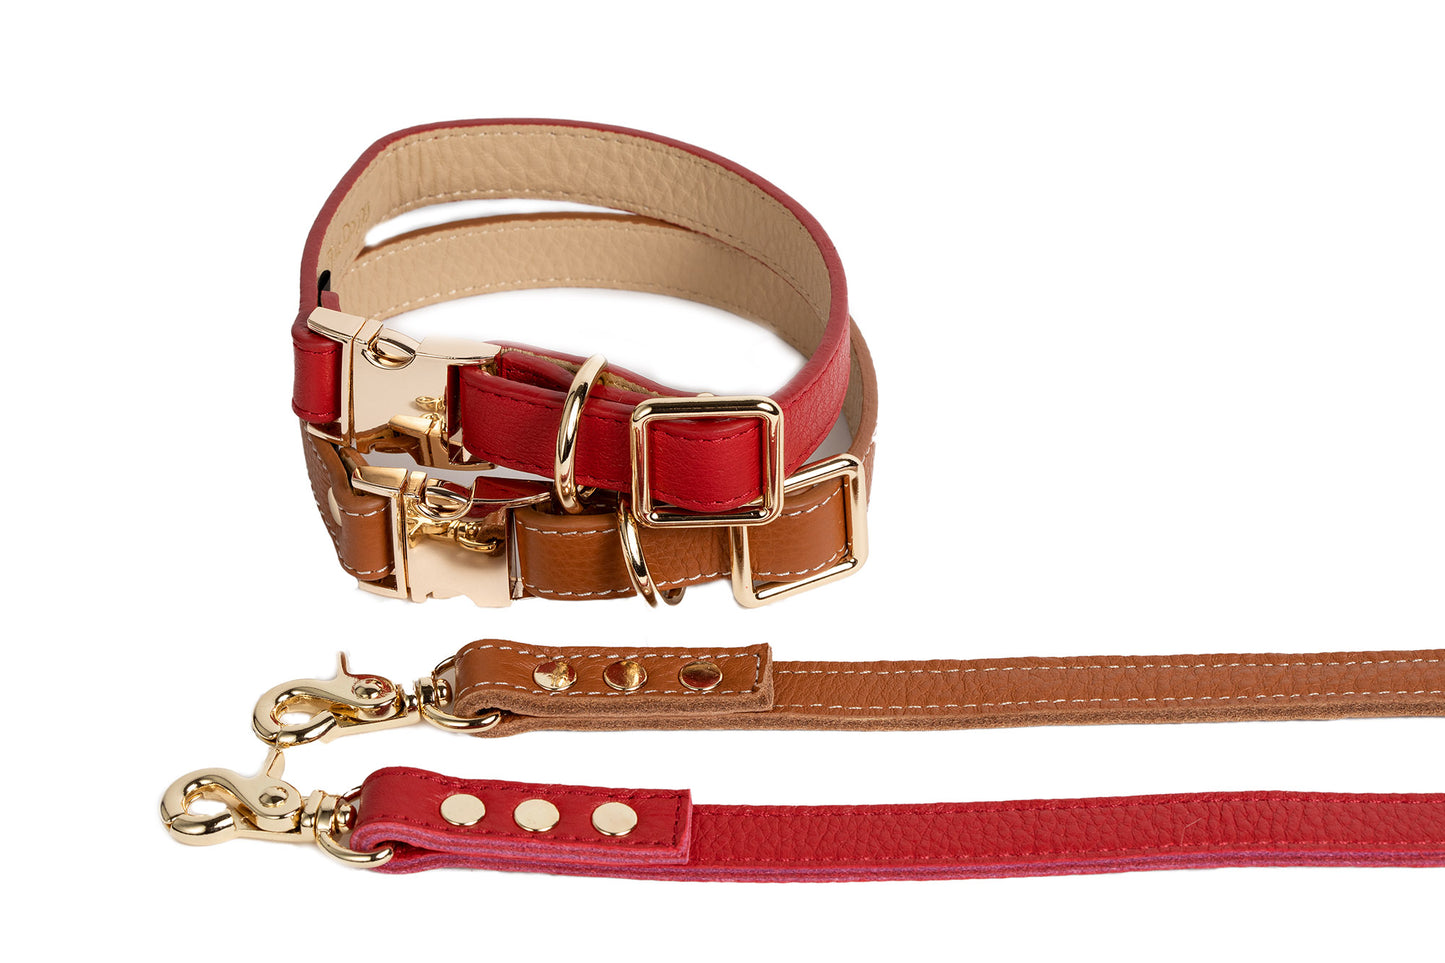 Canine Styles Fine Leather Buckle Collar - 5 Color Options